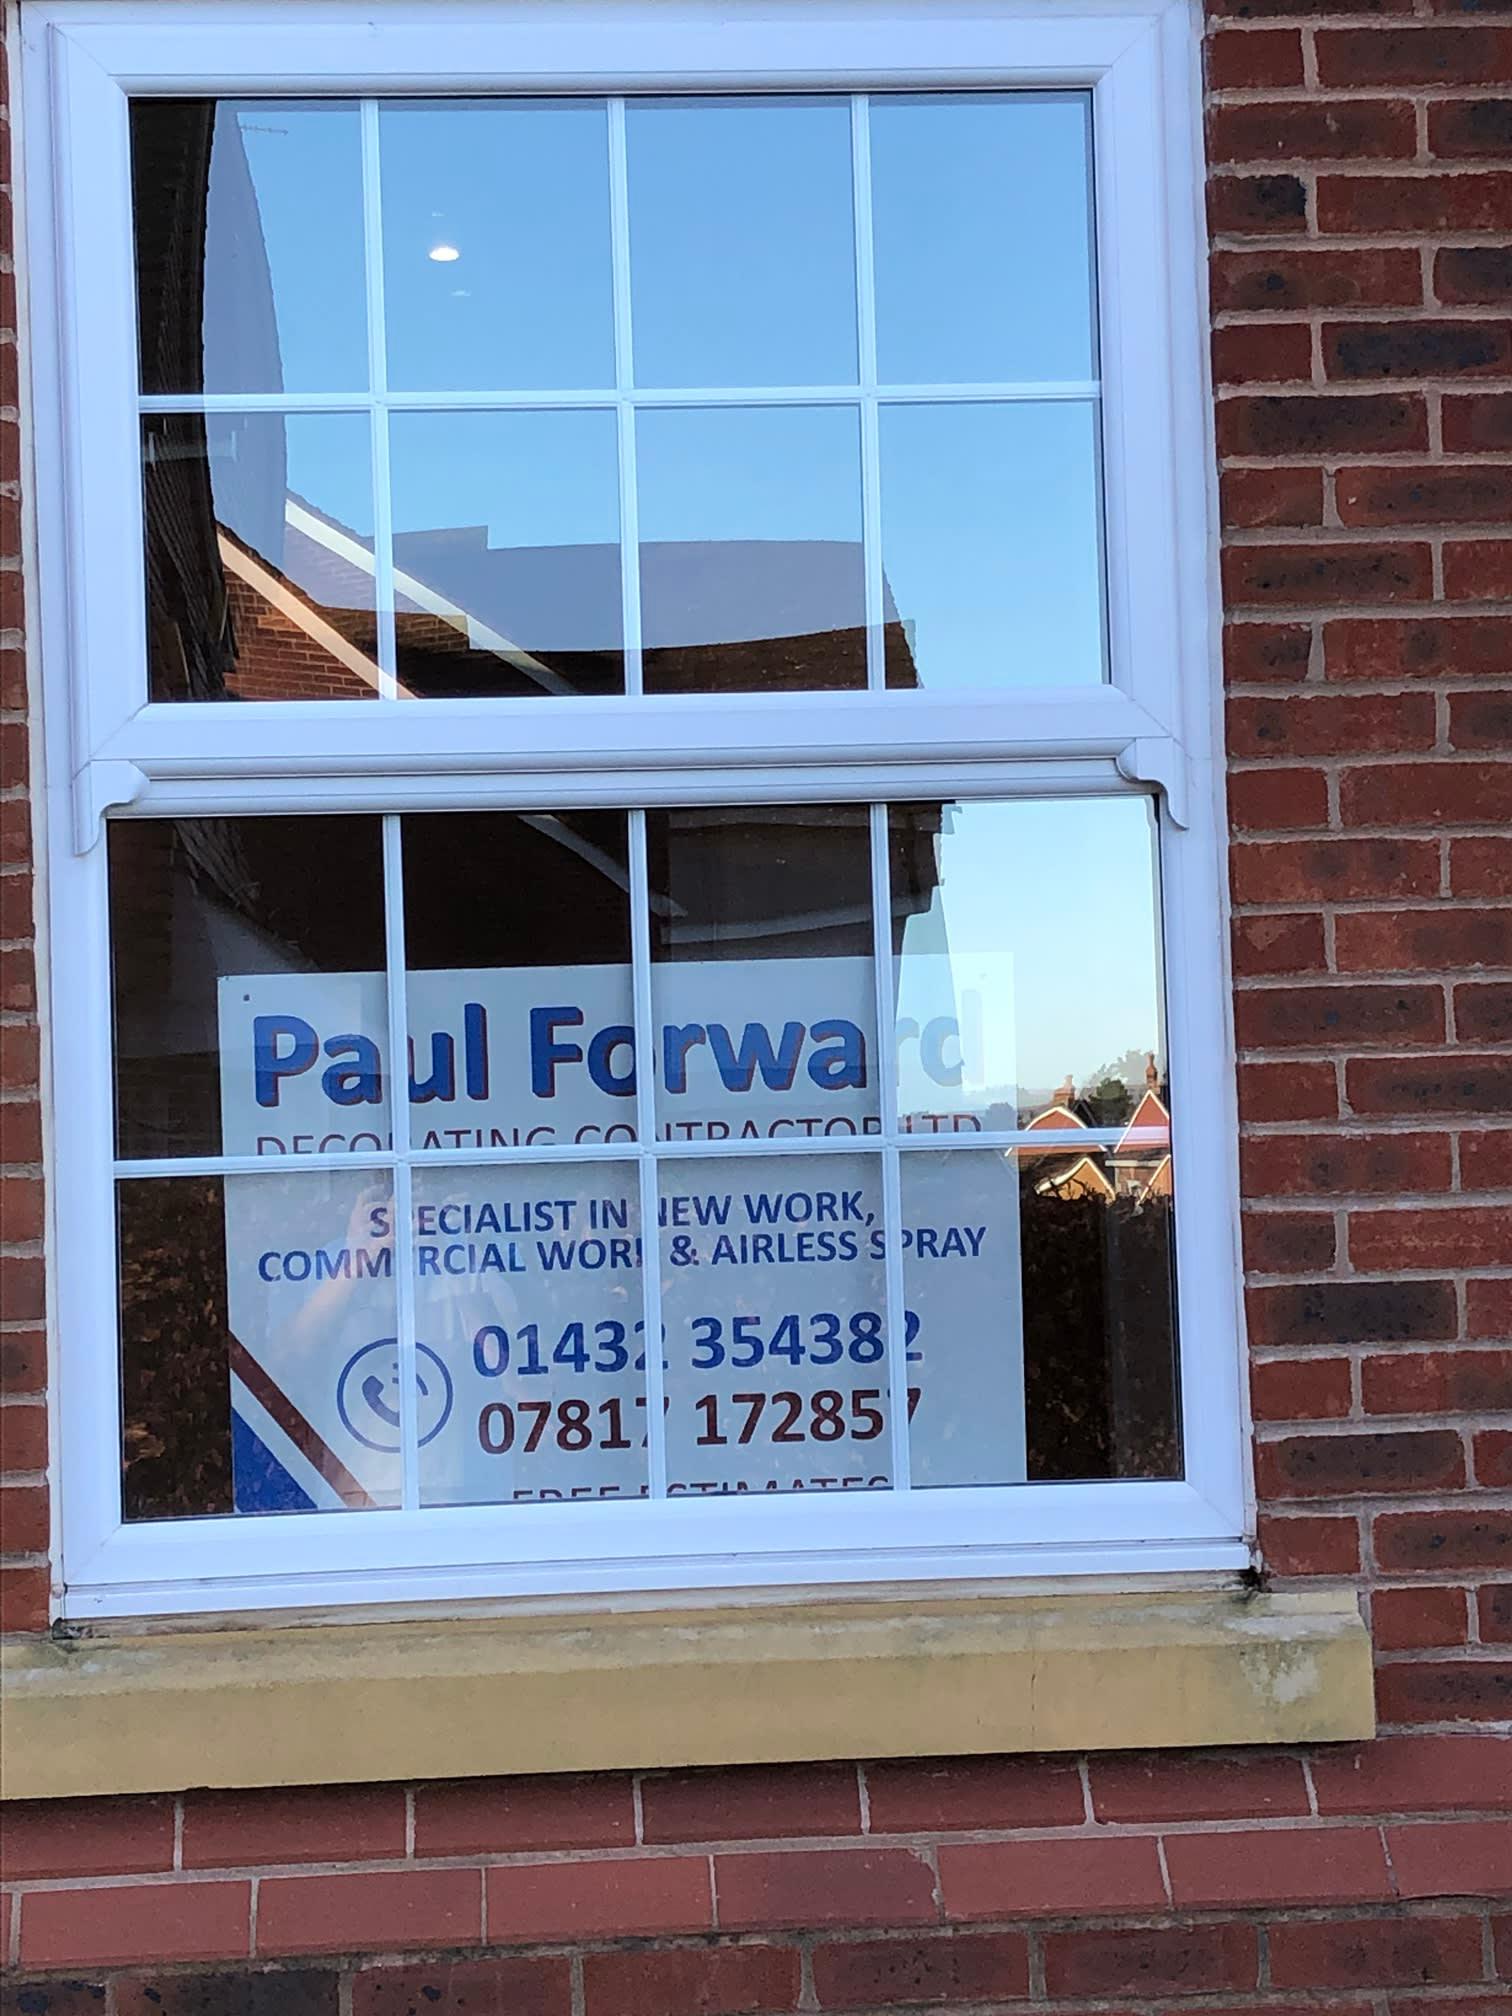 Paul Forward Decorating Contractor Ltd Hereford 07817 172857